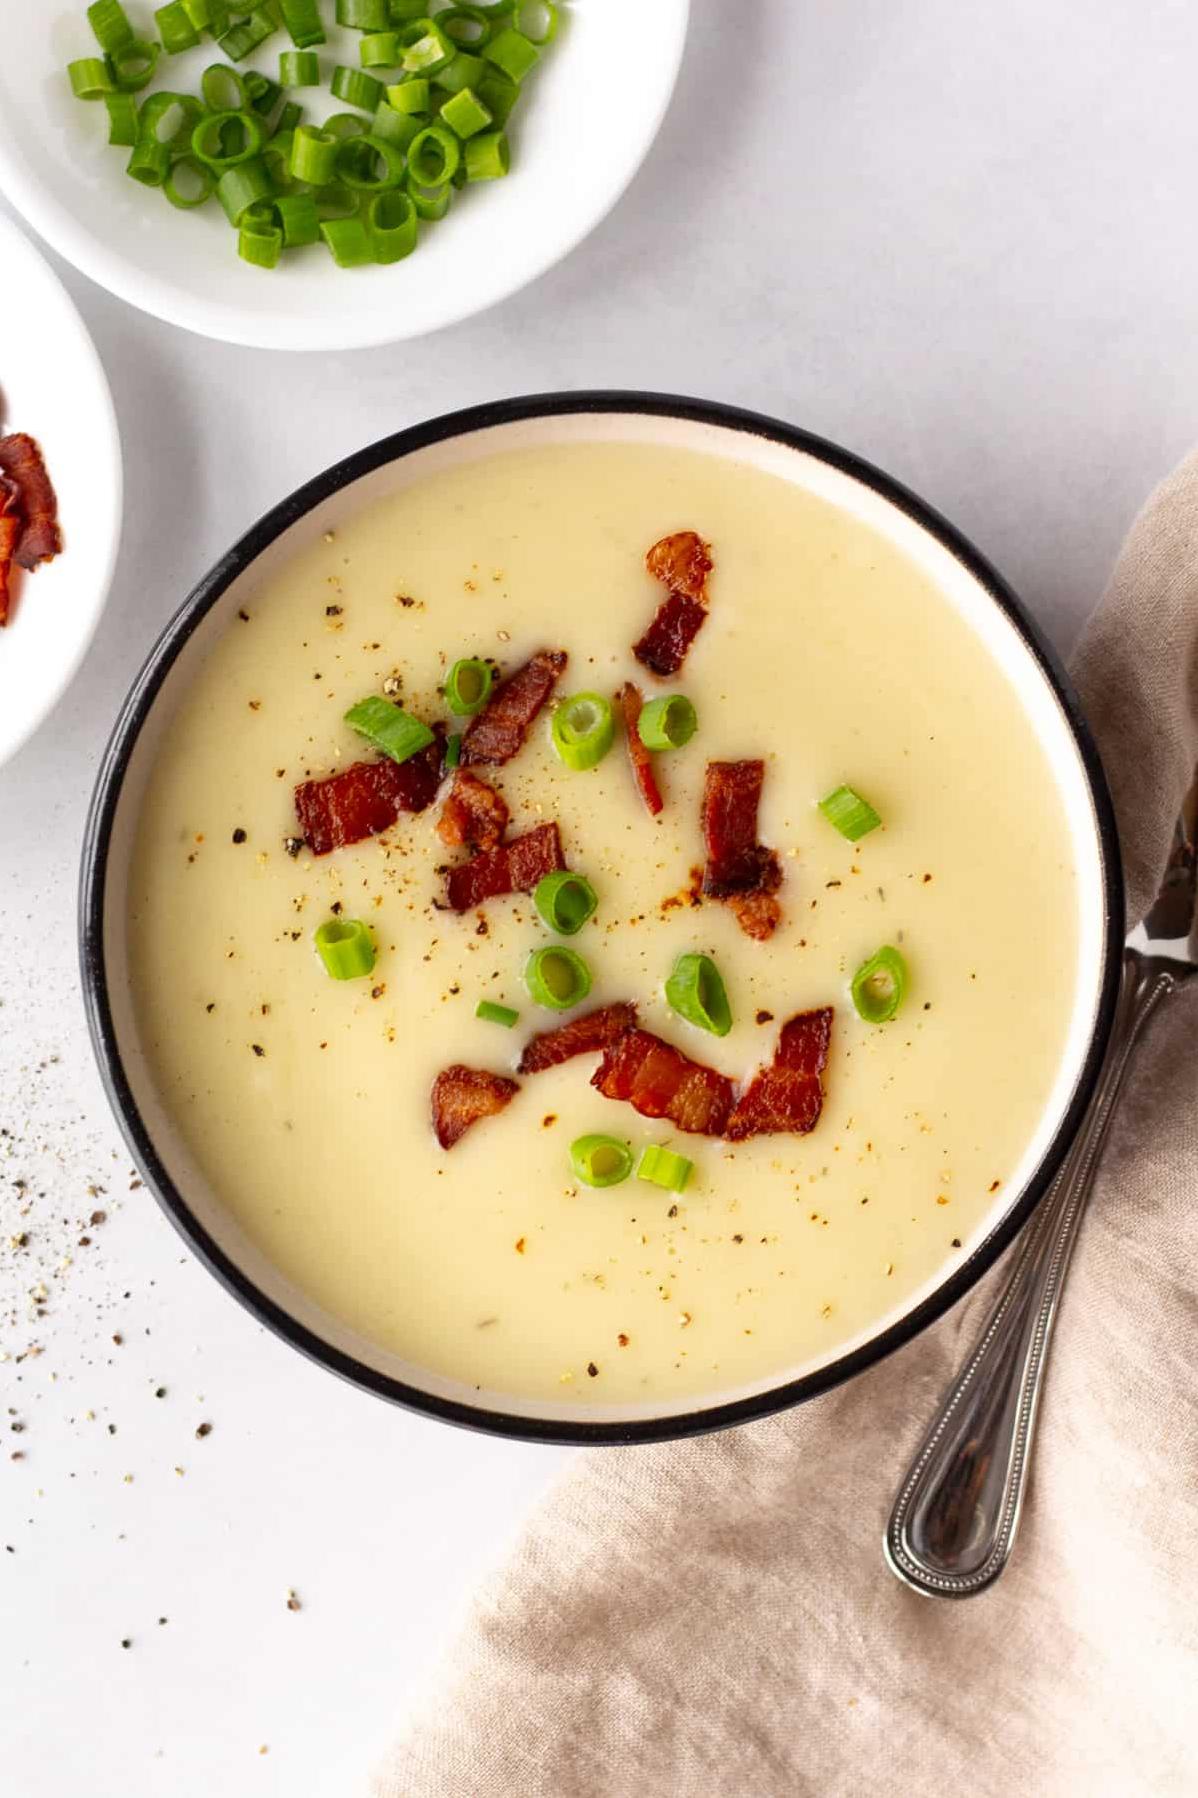  Treat your taste buds to a creamy and satisfying soup, minus the gluten or dairy.